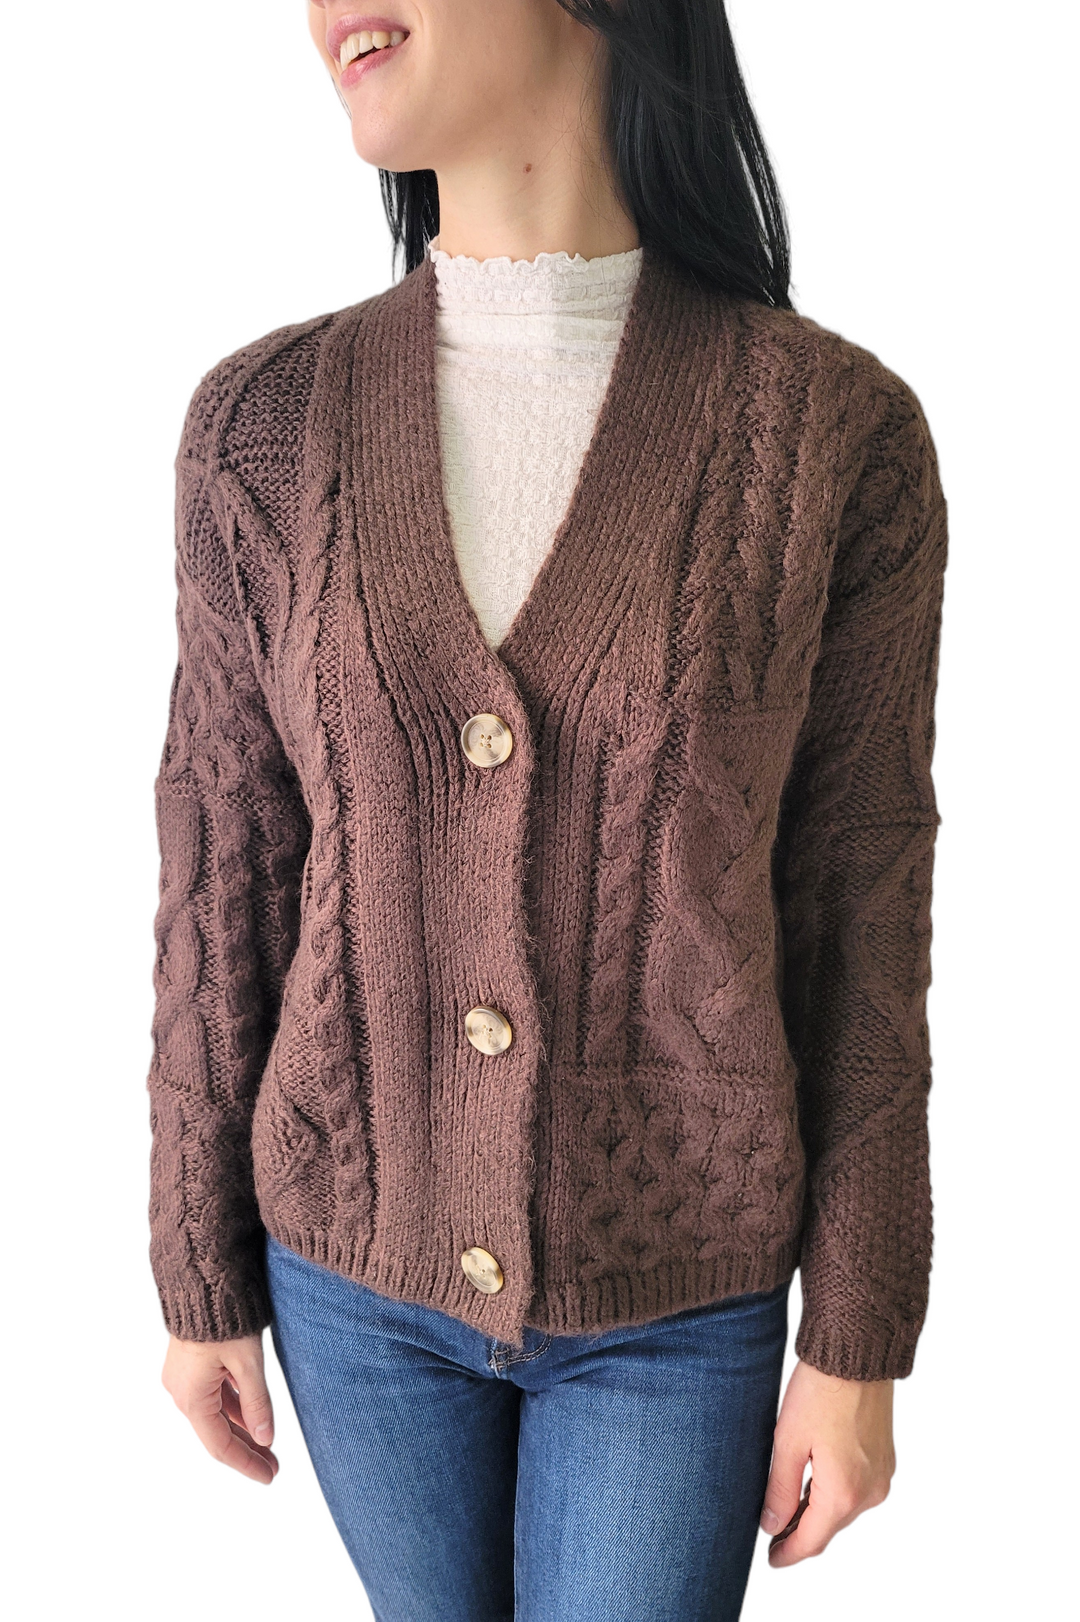 Dex Chocolate Brown Cable Knit Cardigan